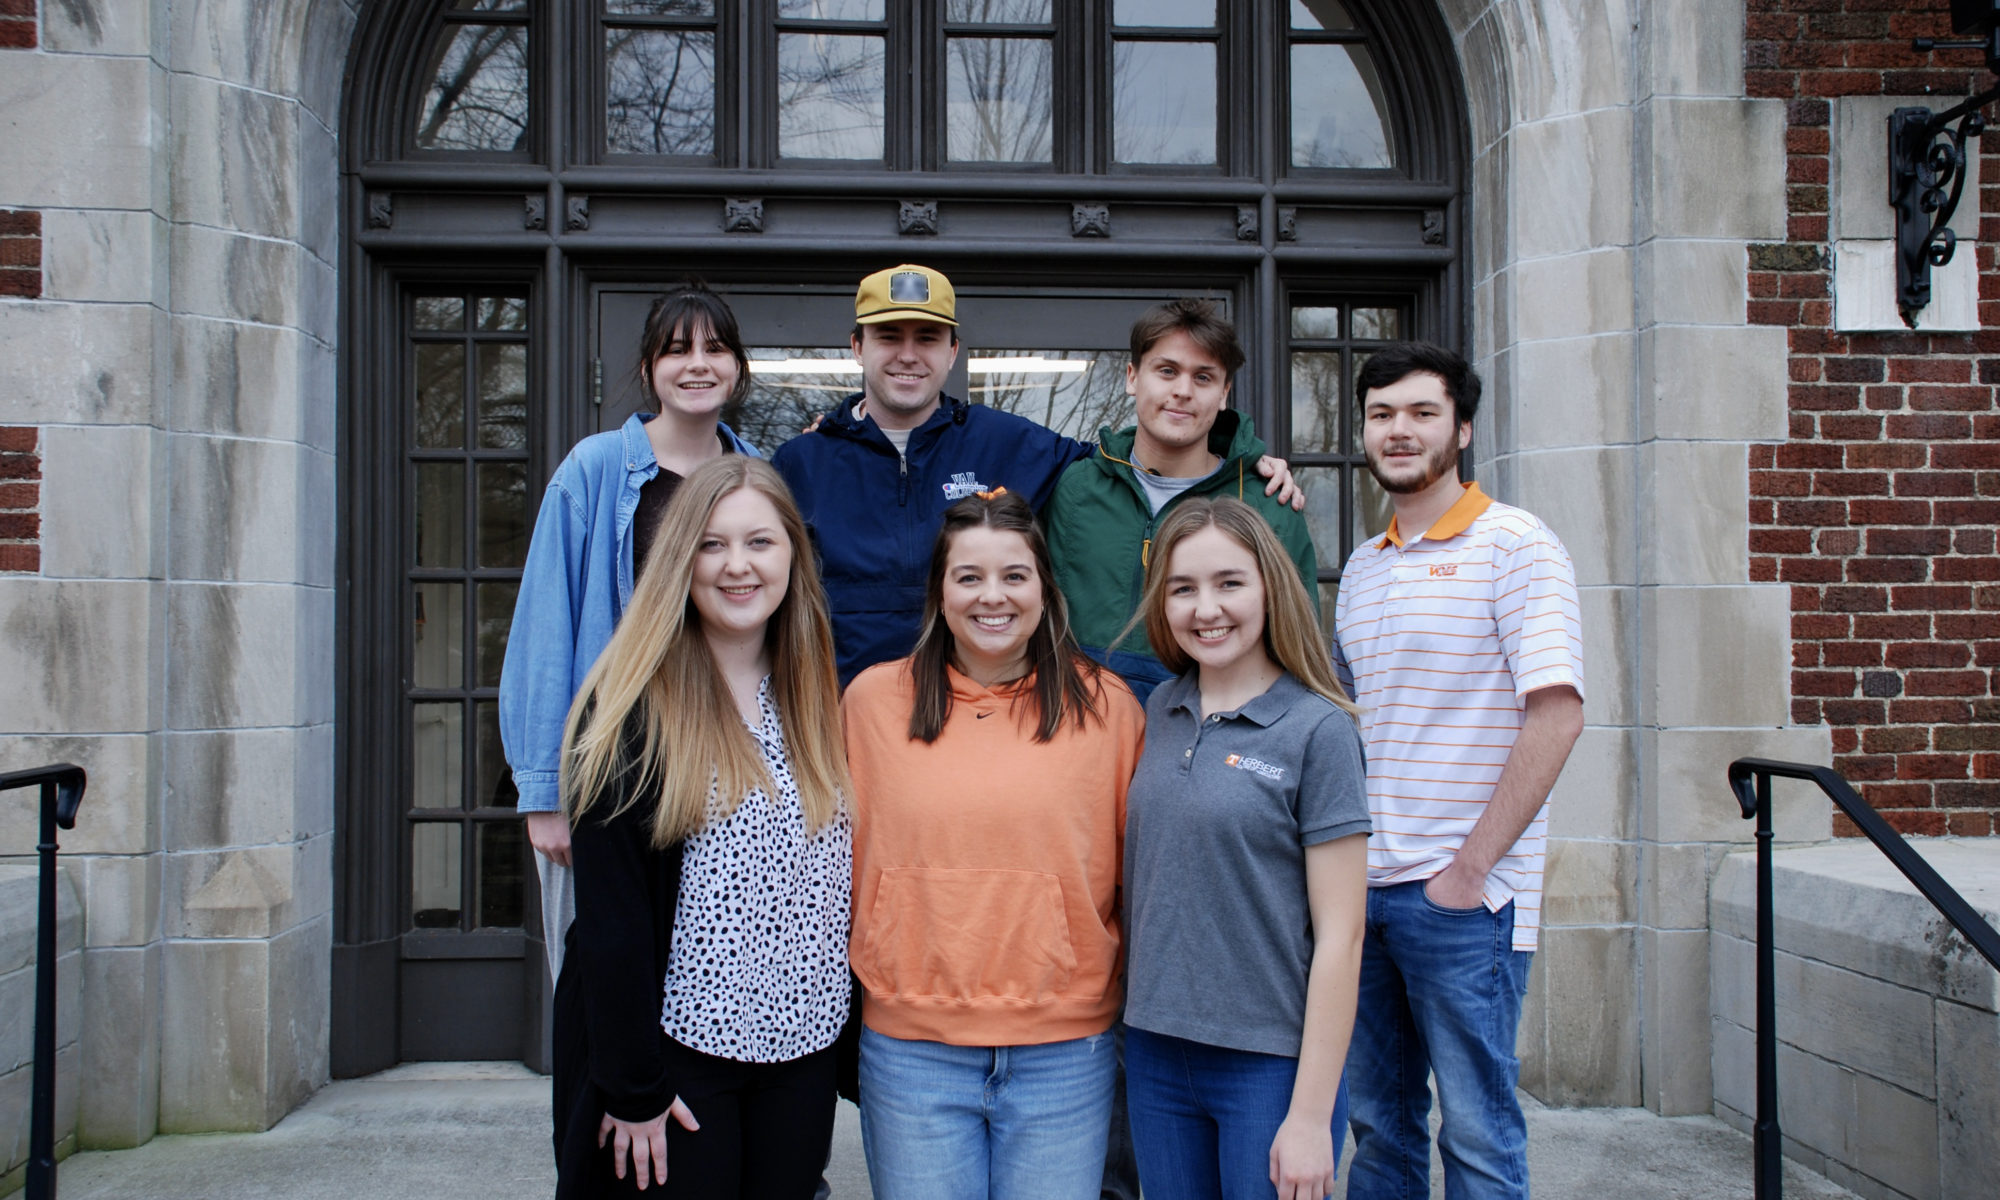 Spring 2022 Undergraduate Researchers standing in front of Morgan Hall